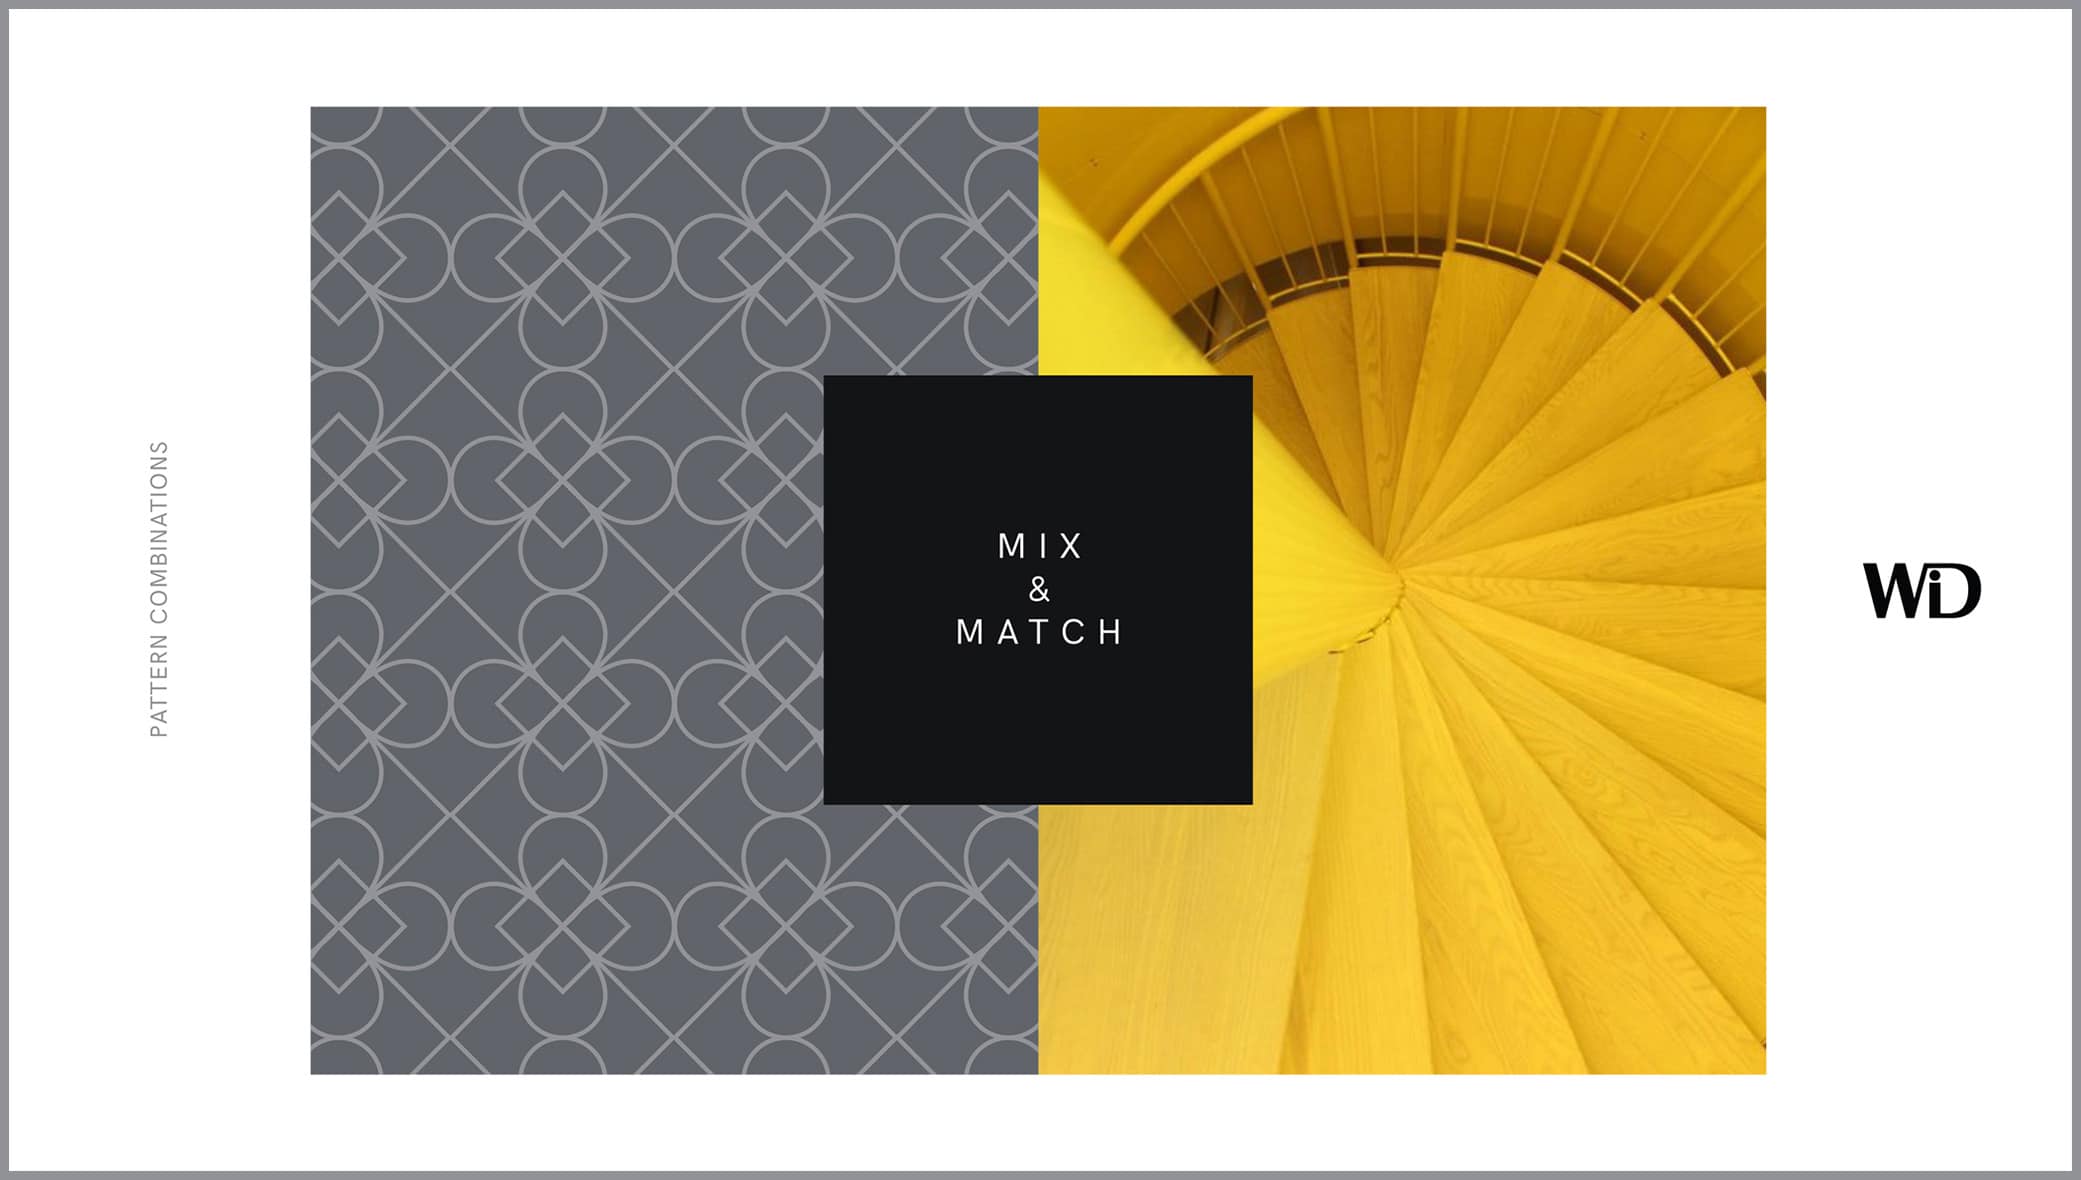 Women in Design branding presentation showcasing a grey pattern combination with a bright yellow staircase visual.